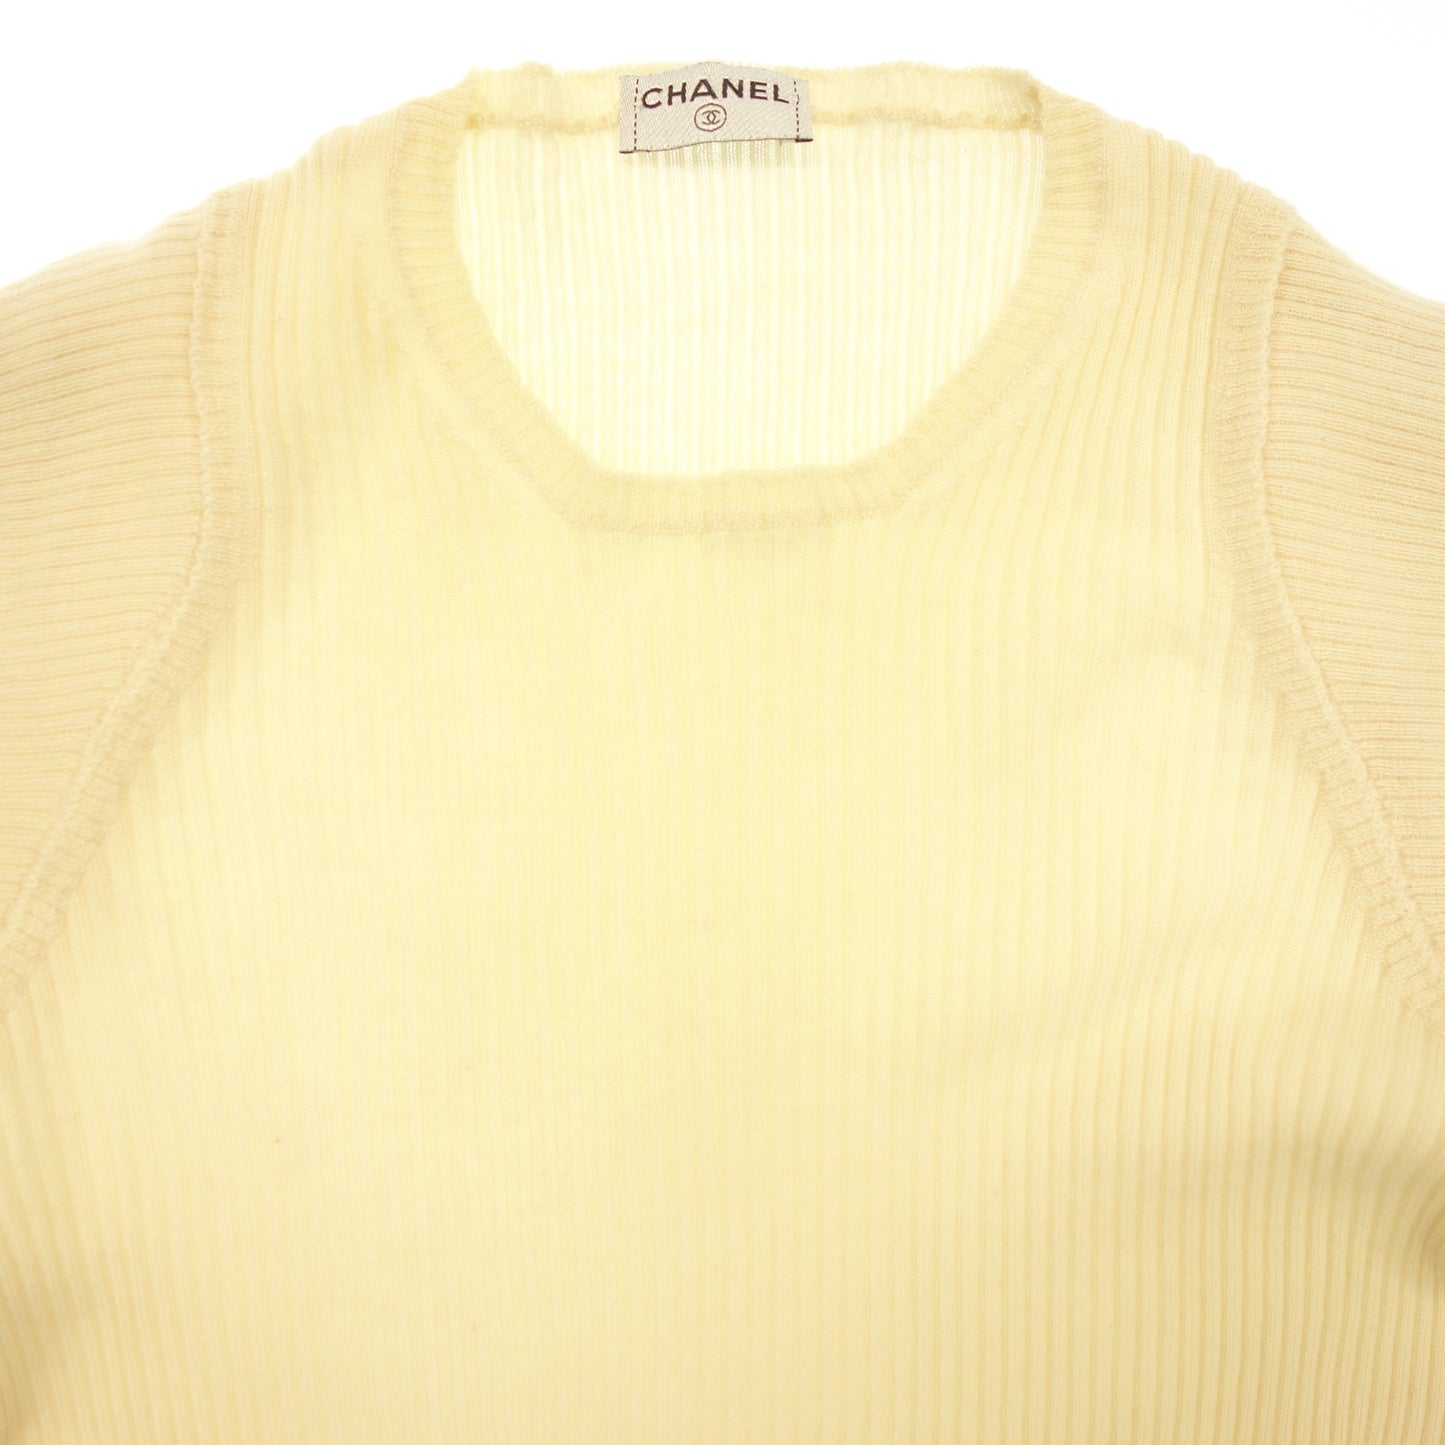 Good Condition◆CHANEL Knit Sweater Here Mark Button Rhinestone Cashmere x Silk Ladies White CHANEL [AFB51] 